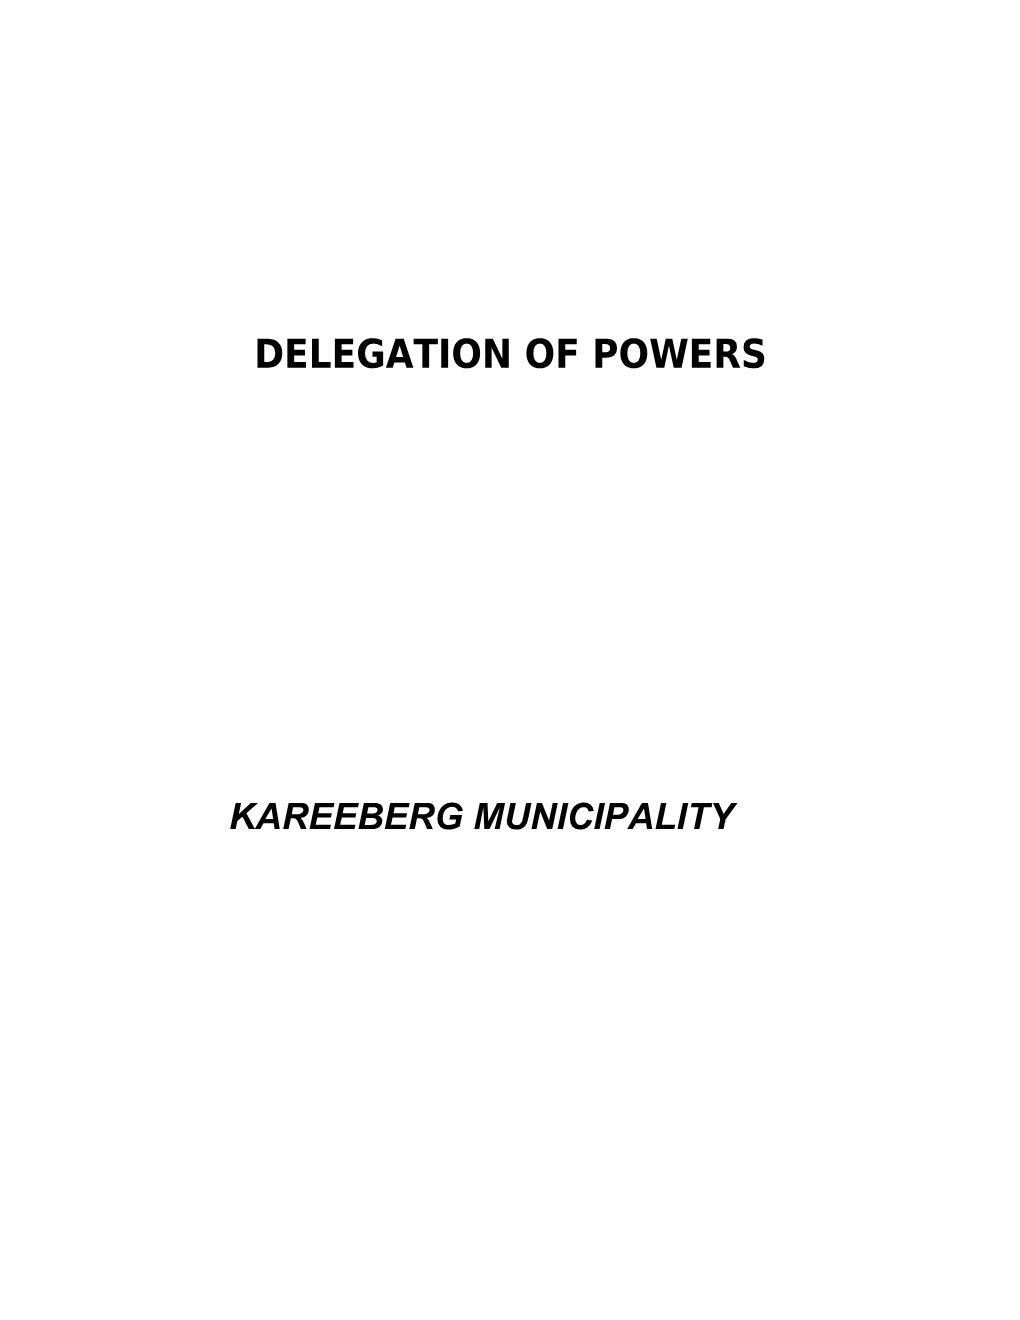 Delegation of Powers